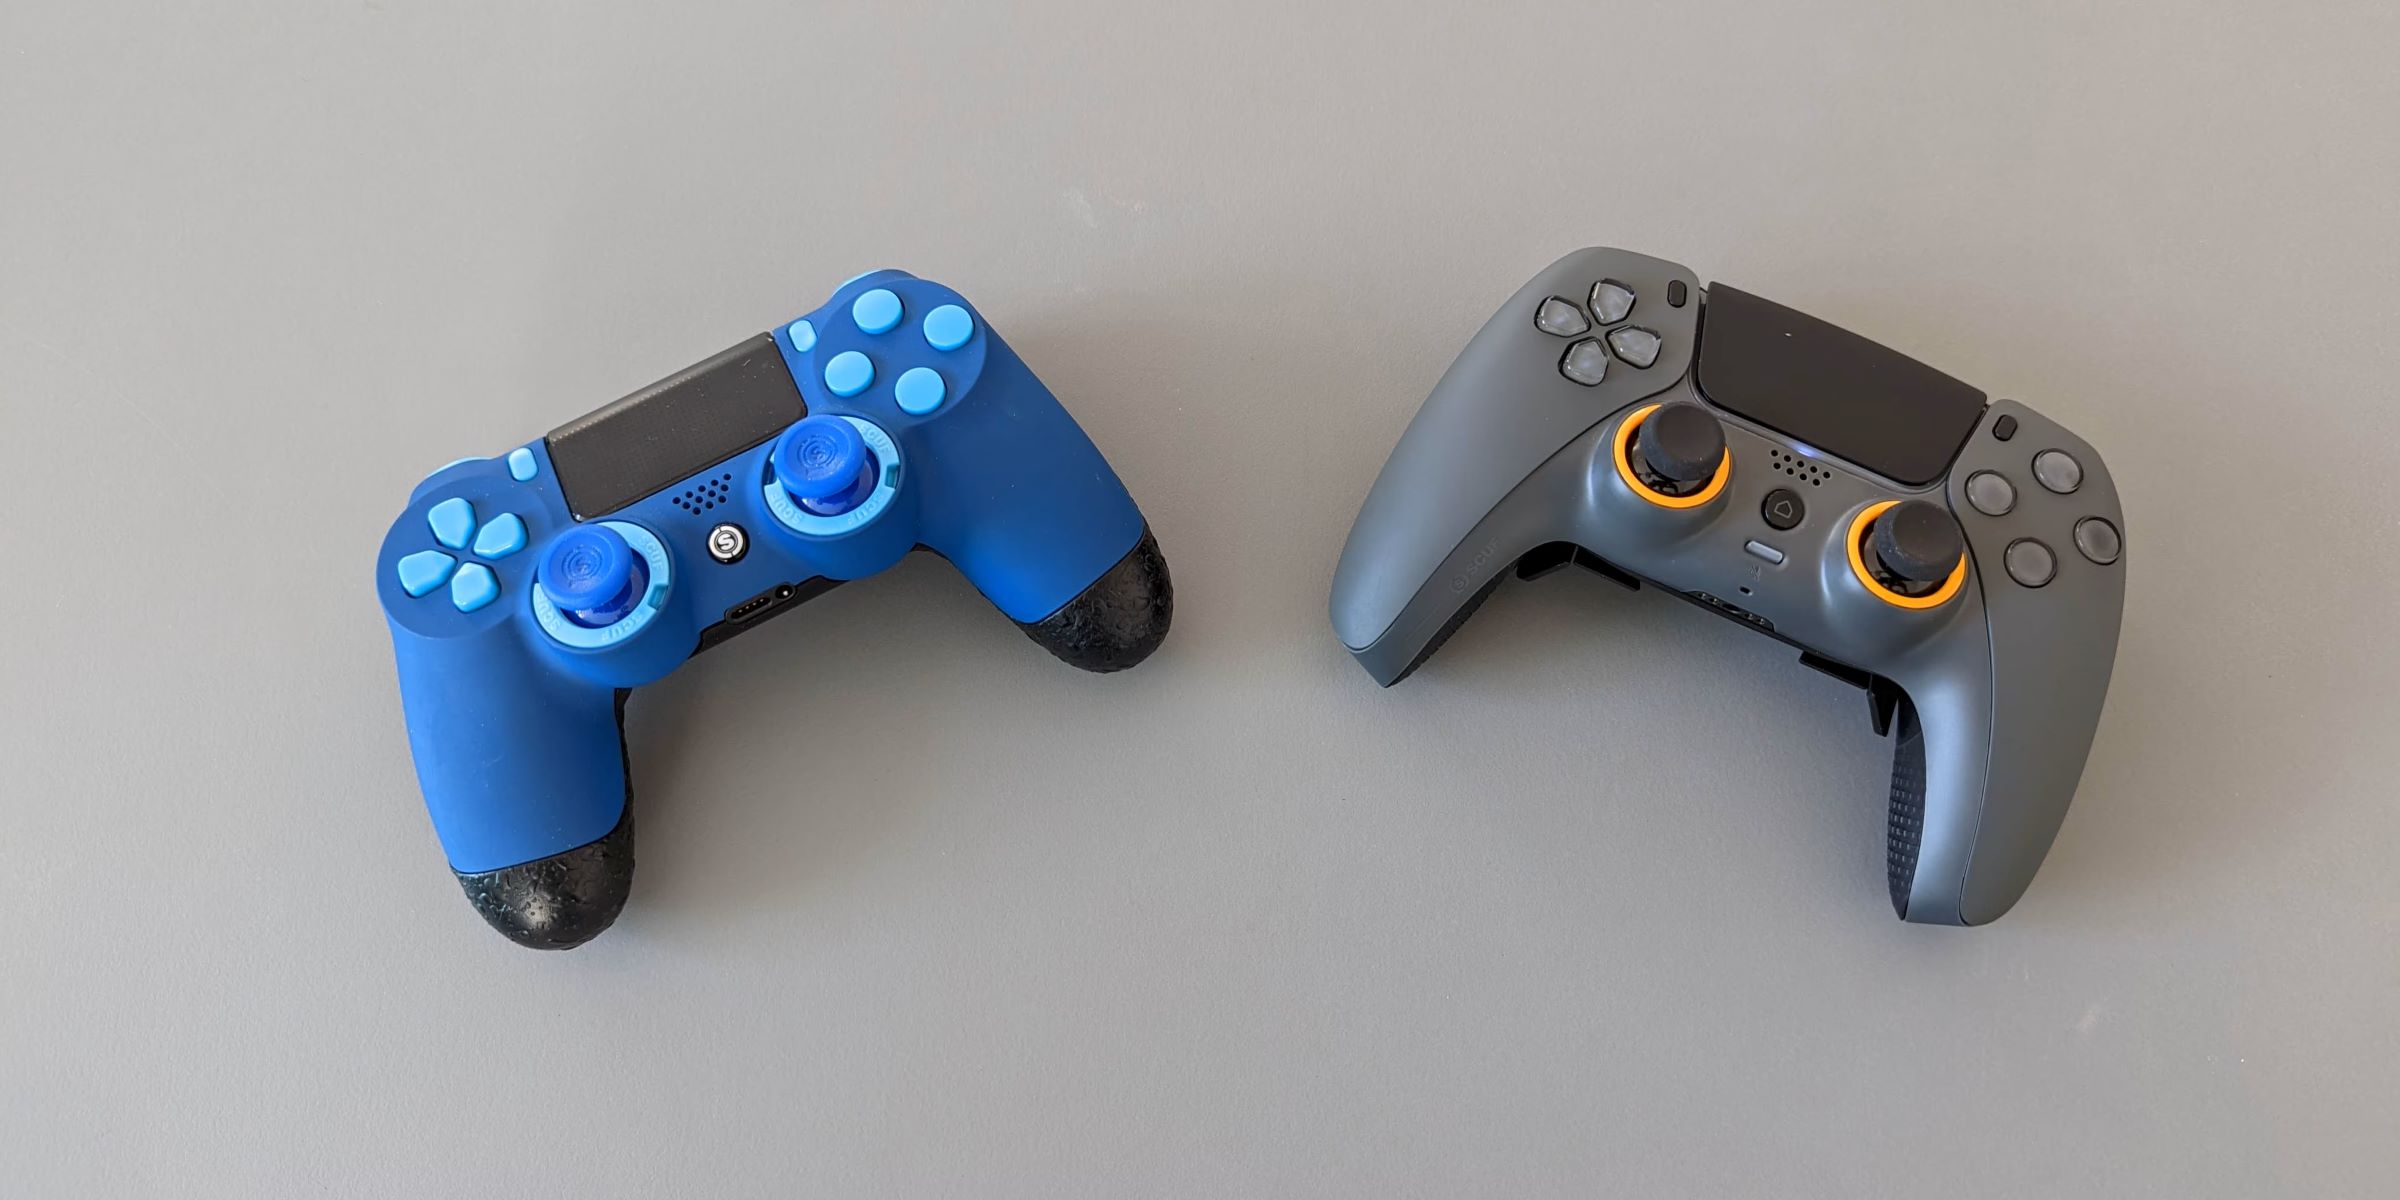 Why Spend $150 On A Scuf Game Controller For PlayStation 4